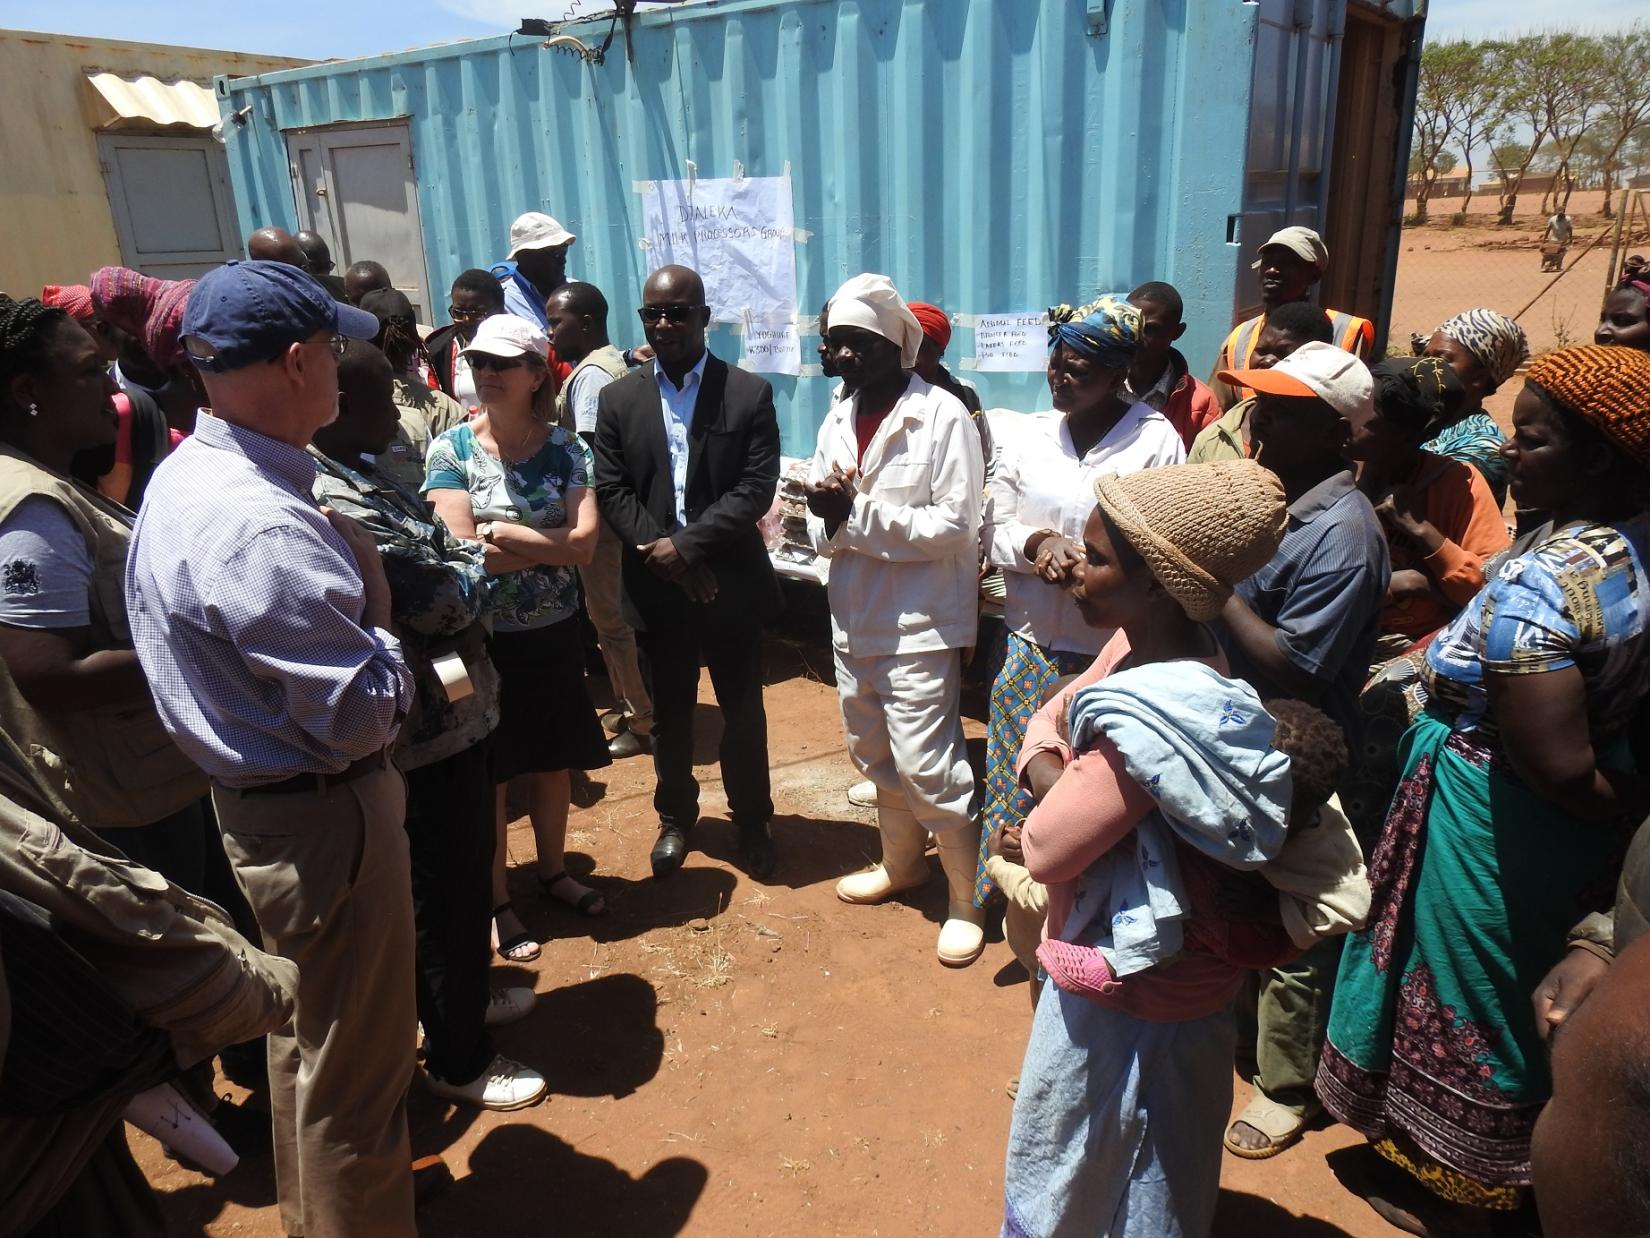 Ambassador Scott interacting with beneficiaries of a livelihood project by UNHCR and implemented through a partner CARD in Dzaleka camp.